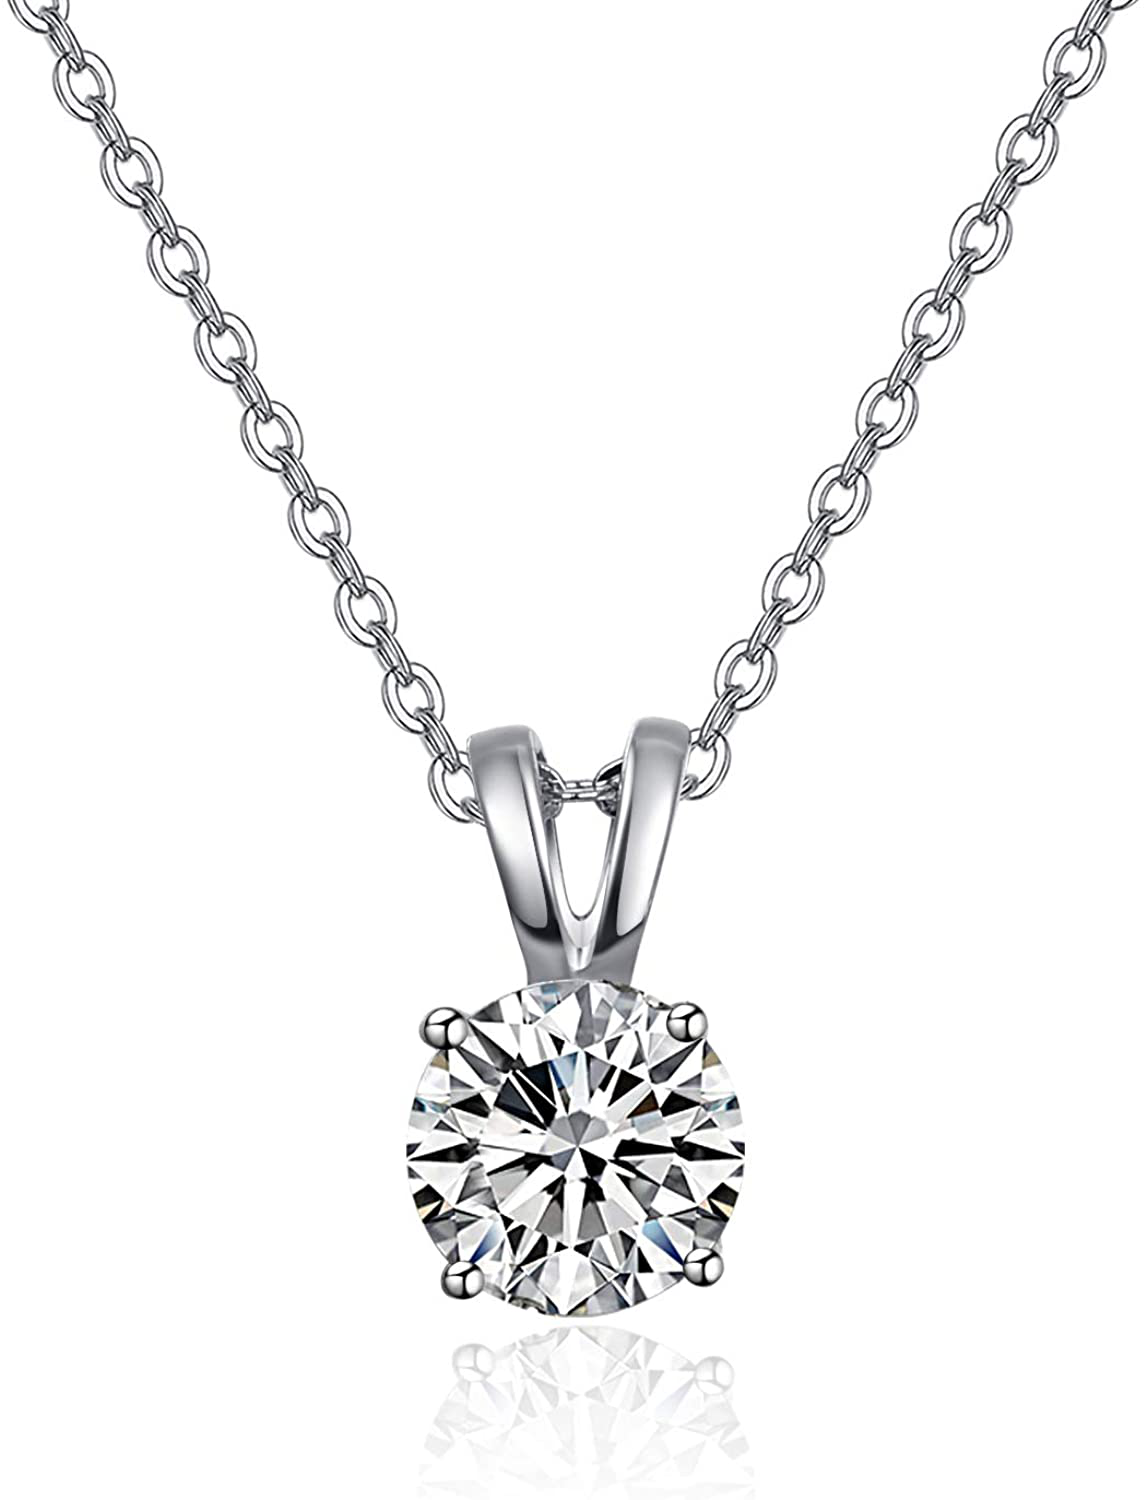 Sterling Silver Cubic Zirconia round Cut Simple Dainty Solitaire Pendant Necklace for Women Bridal Wedding, 18"